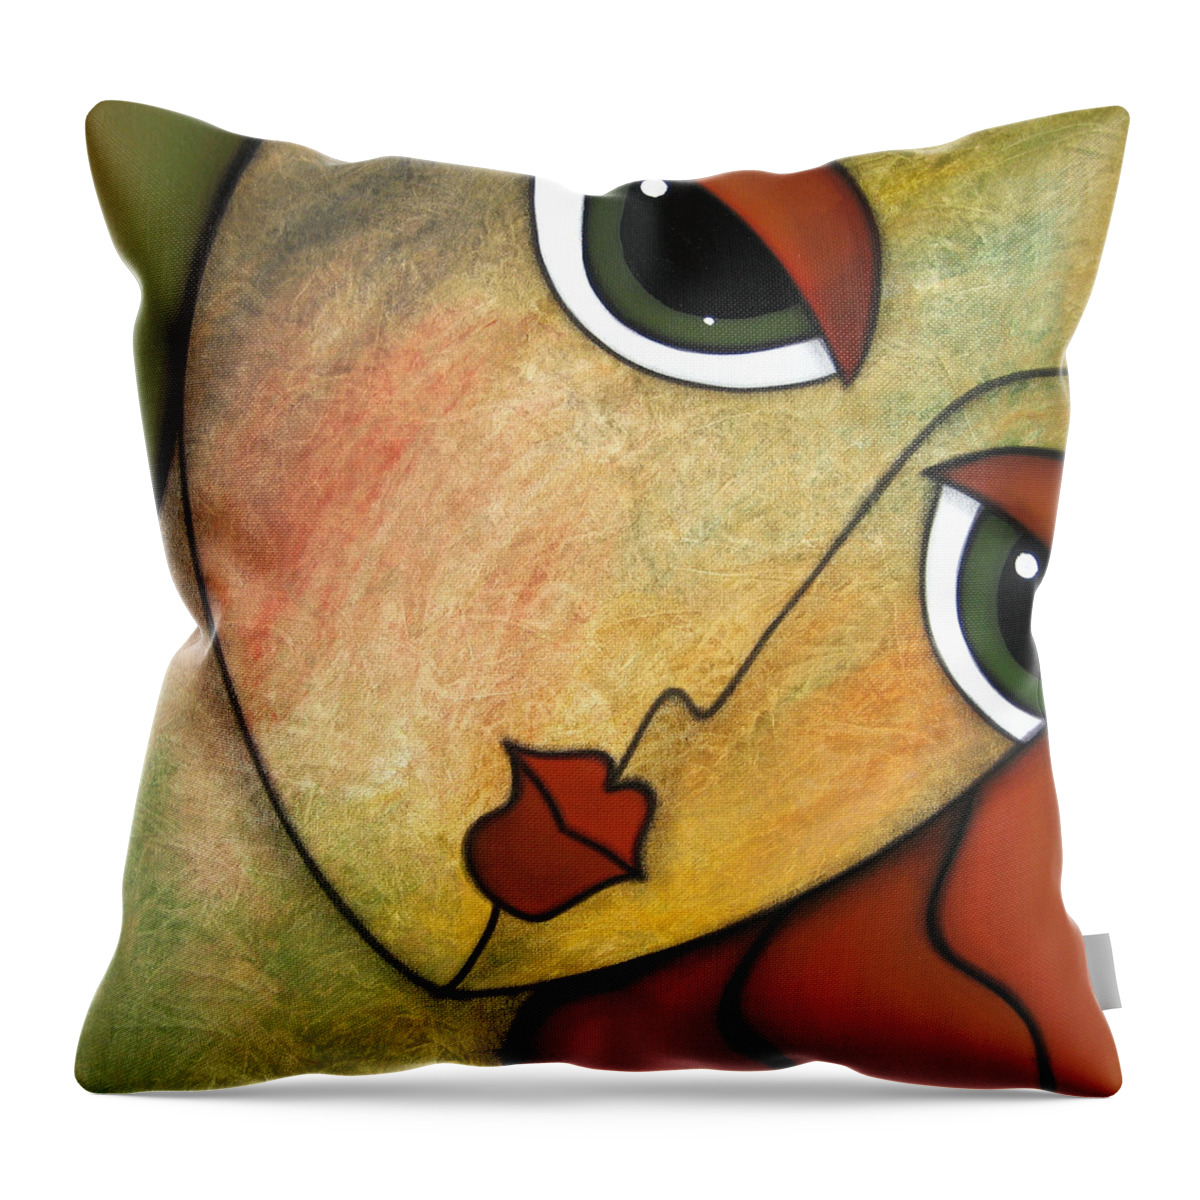 Pop Art Throw Pillow featuring the painting Flawless by Tom Fedro